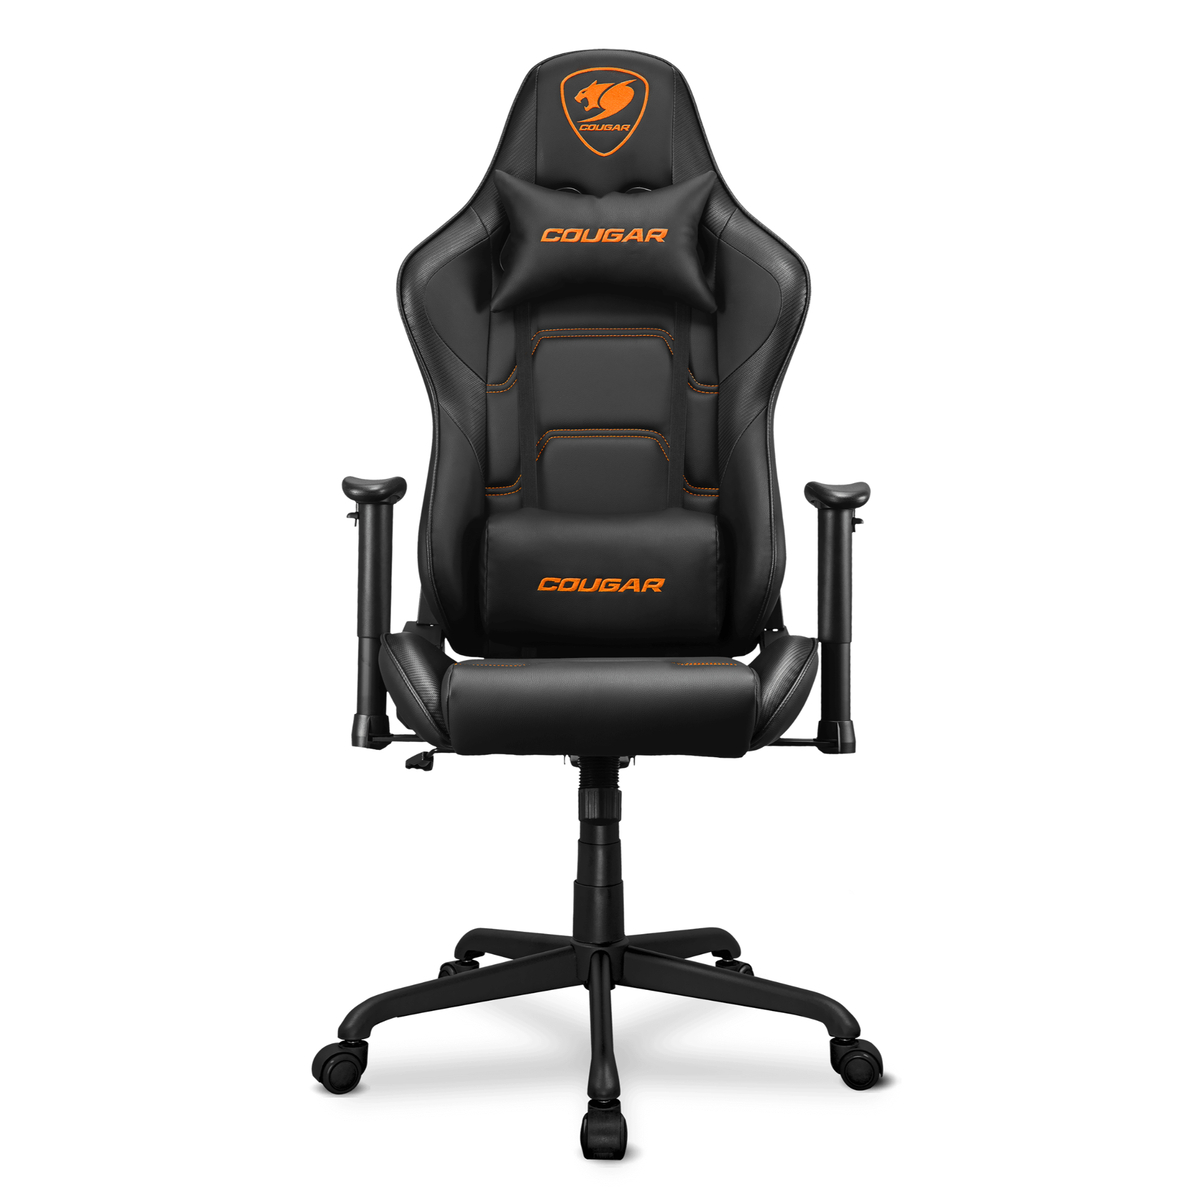 Cougar Fully Adjustable Gaming Chair, Black, CG-CHAIR-ARMOR-ELITE-BLK